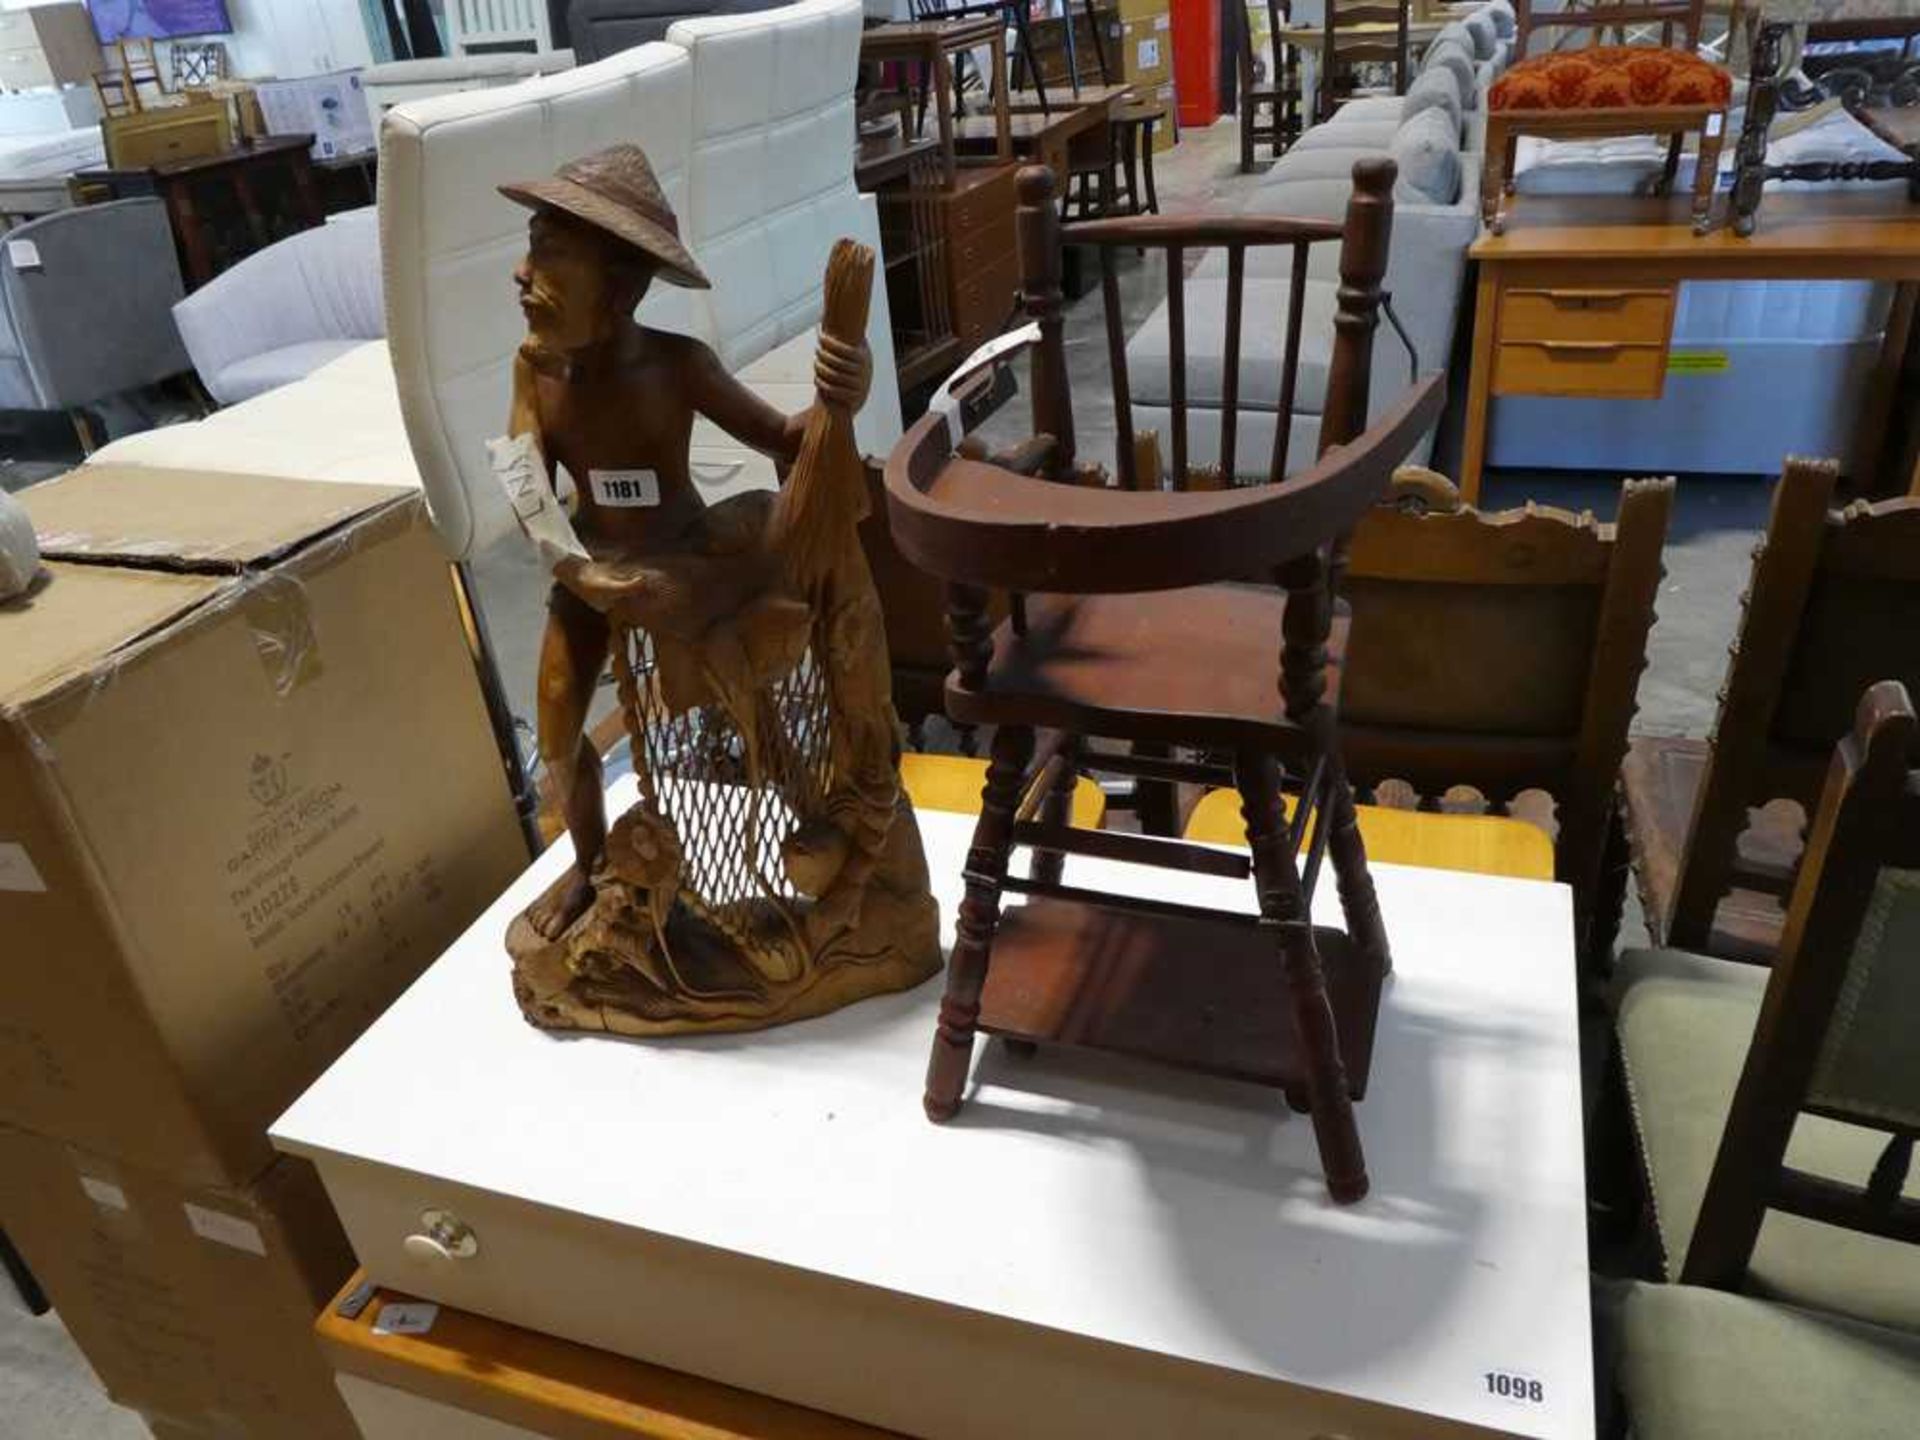 Dolls high chair and carved wooden statue of fisherman